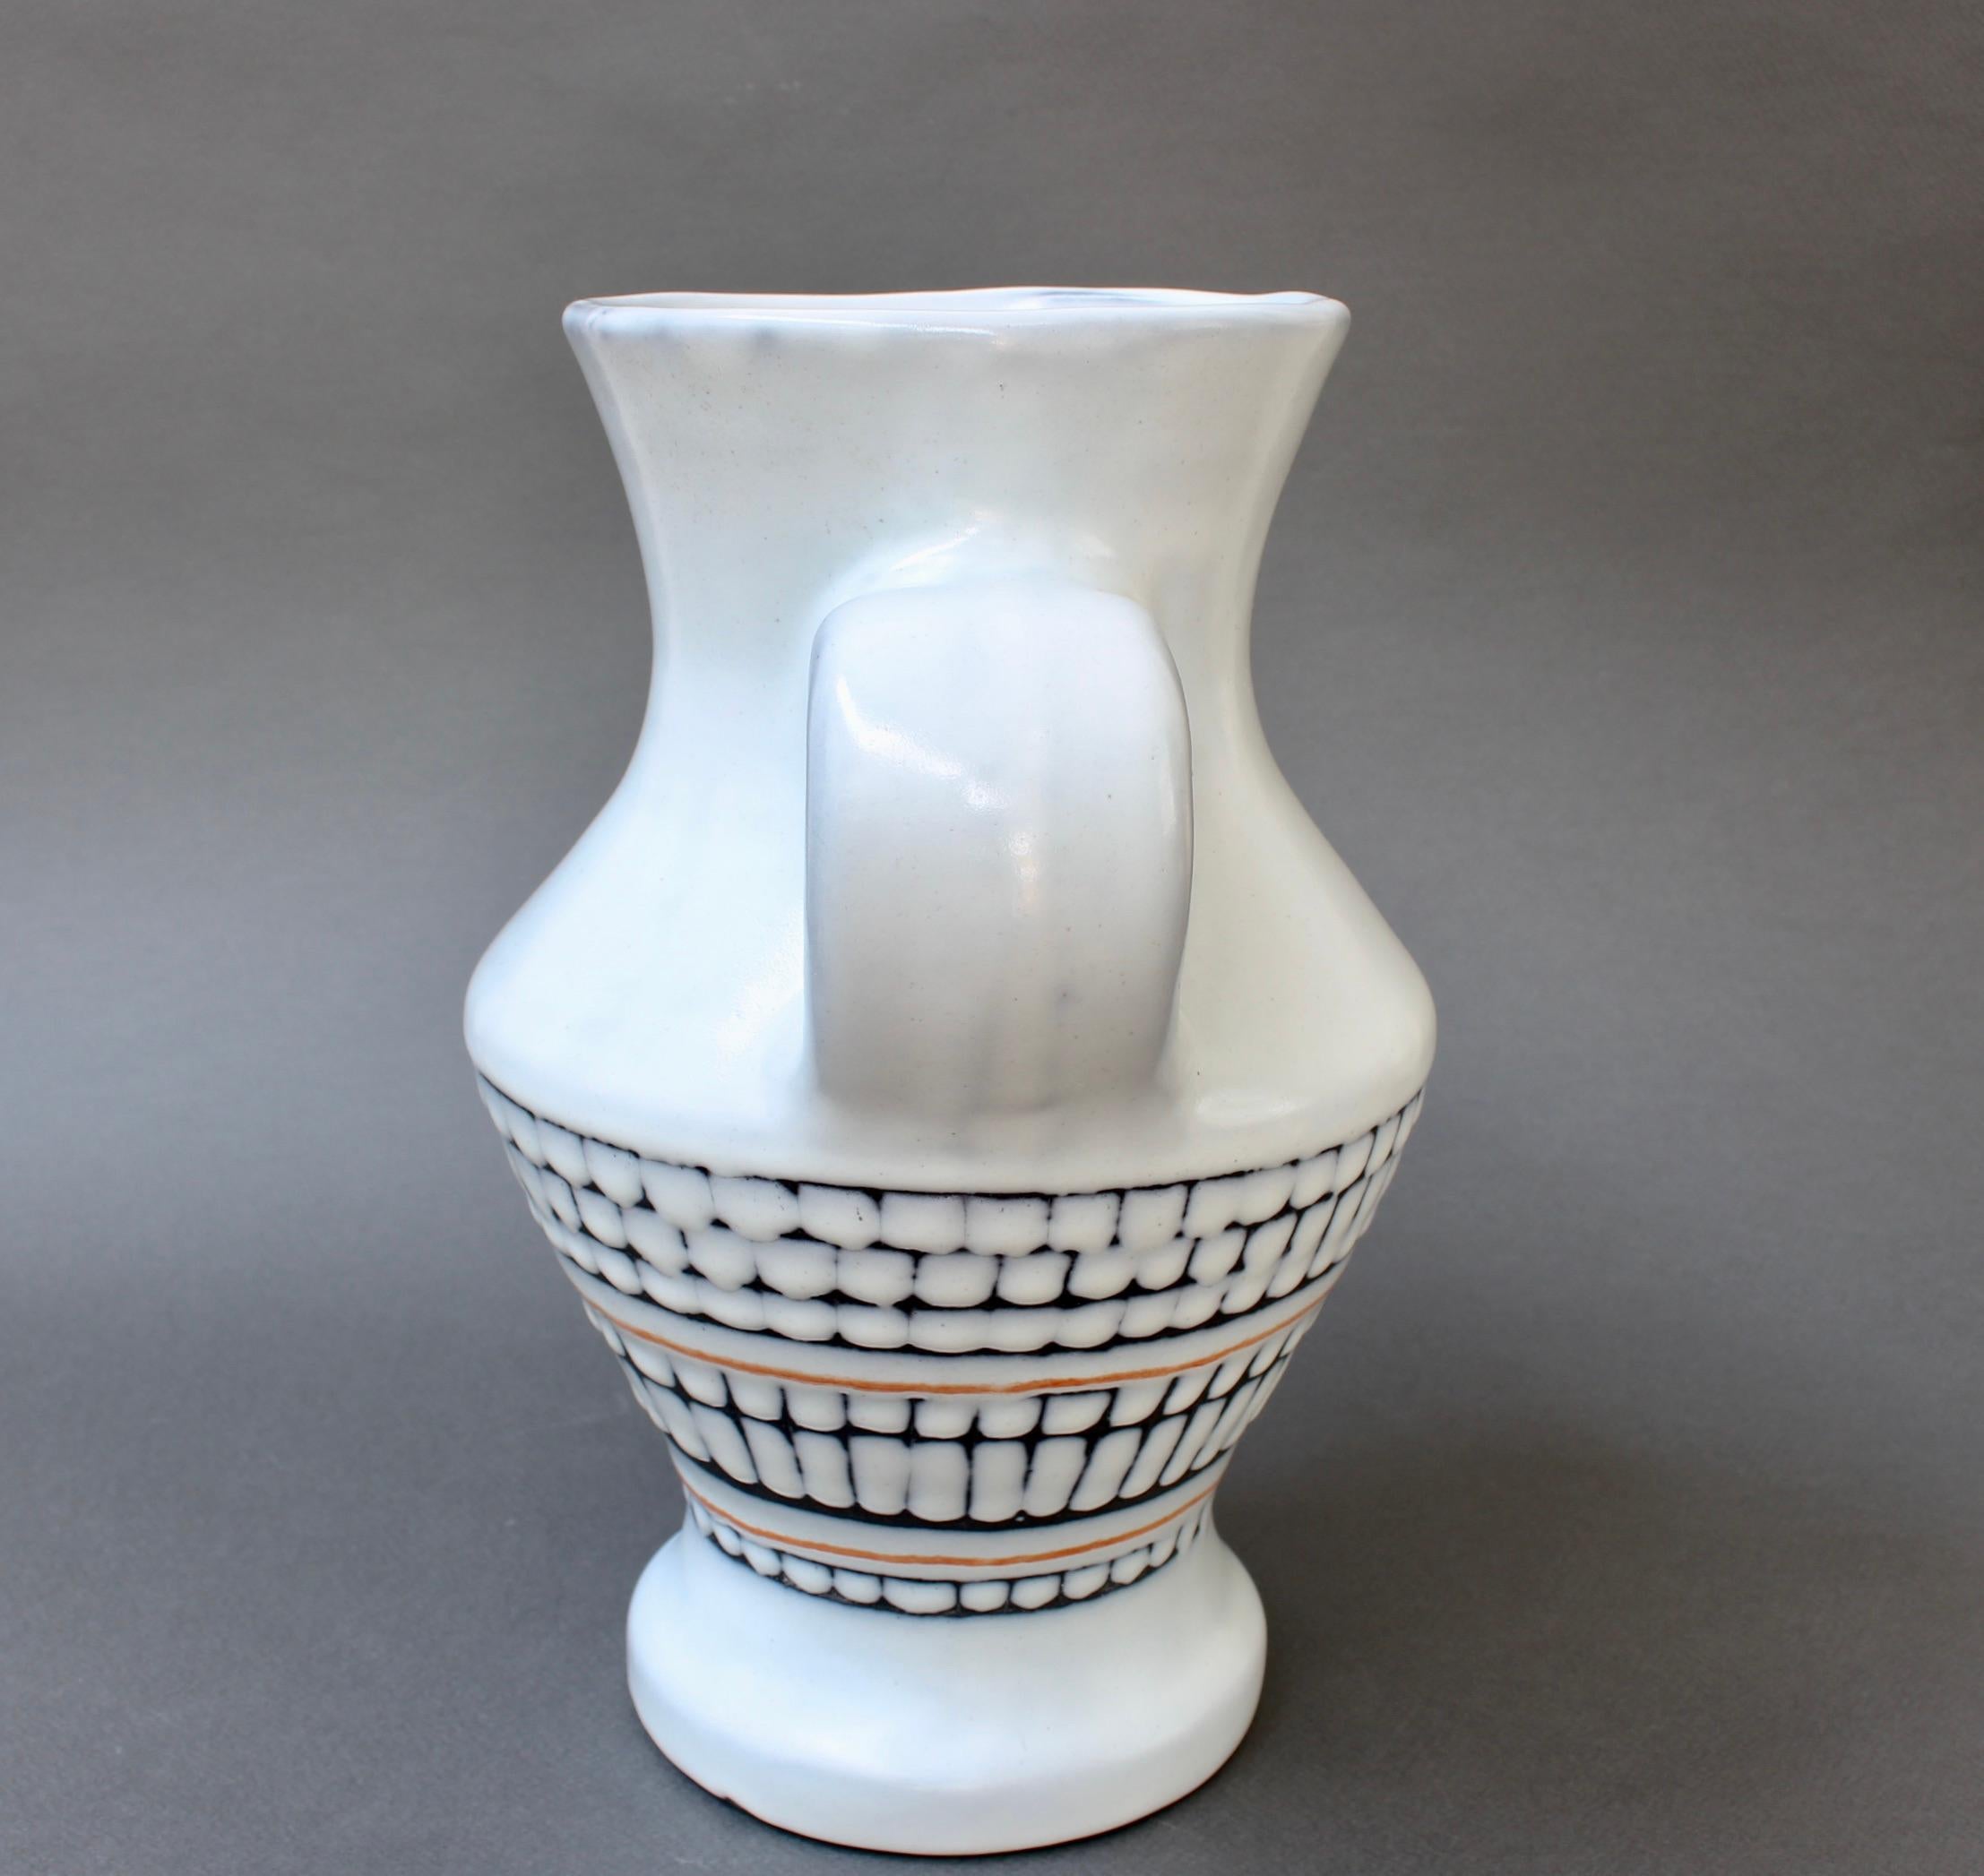 Vintage French Ceramic Vase with Handles by Roger Capron, 'circa 1950s' In Good Condition For Sale In London, GB